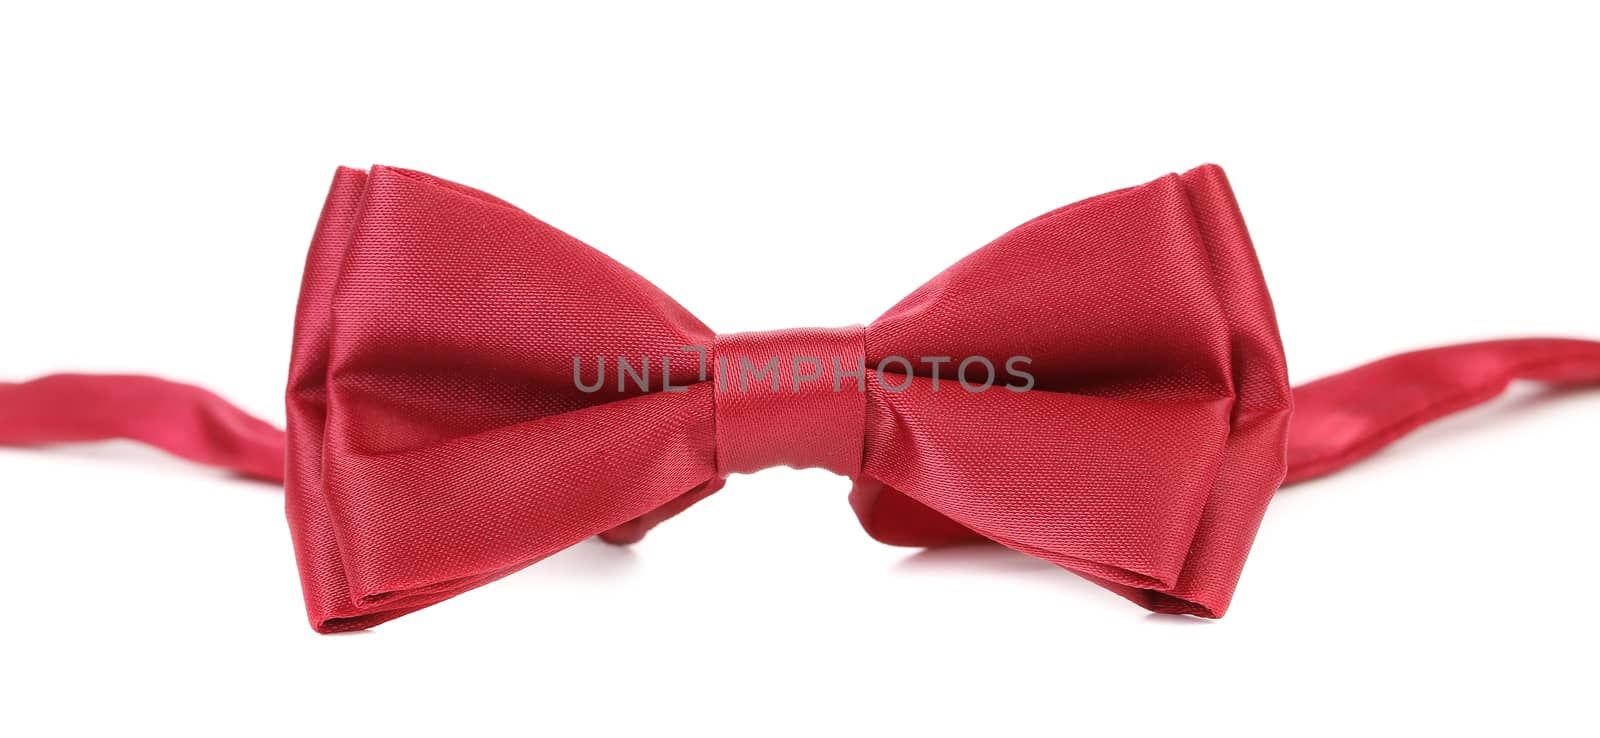 Red bow tie. by indigolotos